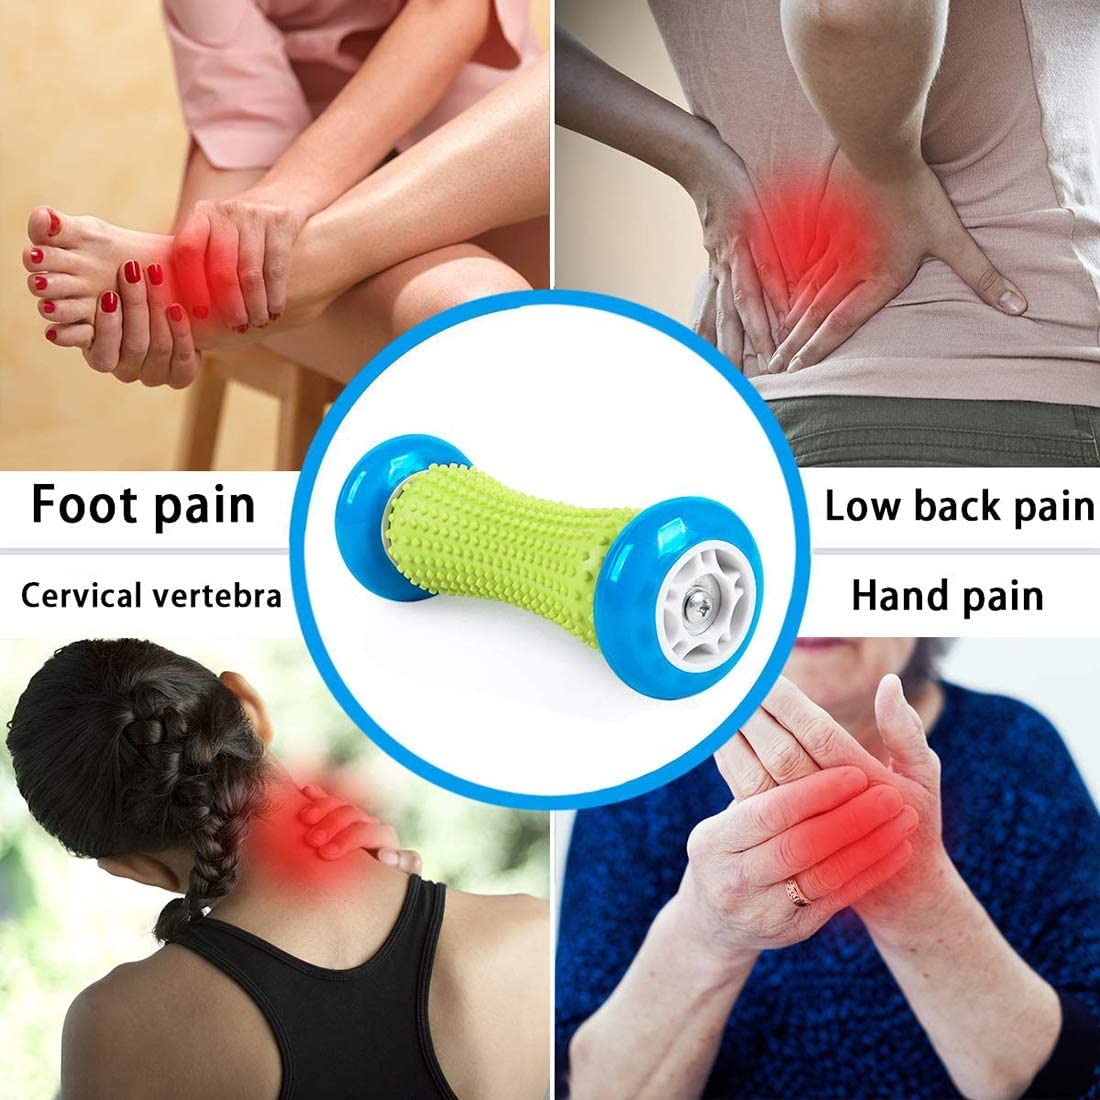 Trigger Point Therapy - Superficial Muscles of the Foot | Foot Pain, Heel  Pain and more | Niel Asher Education Blogs and Articles blog